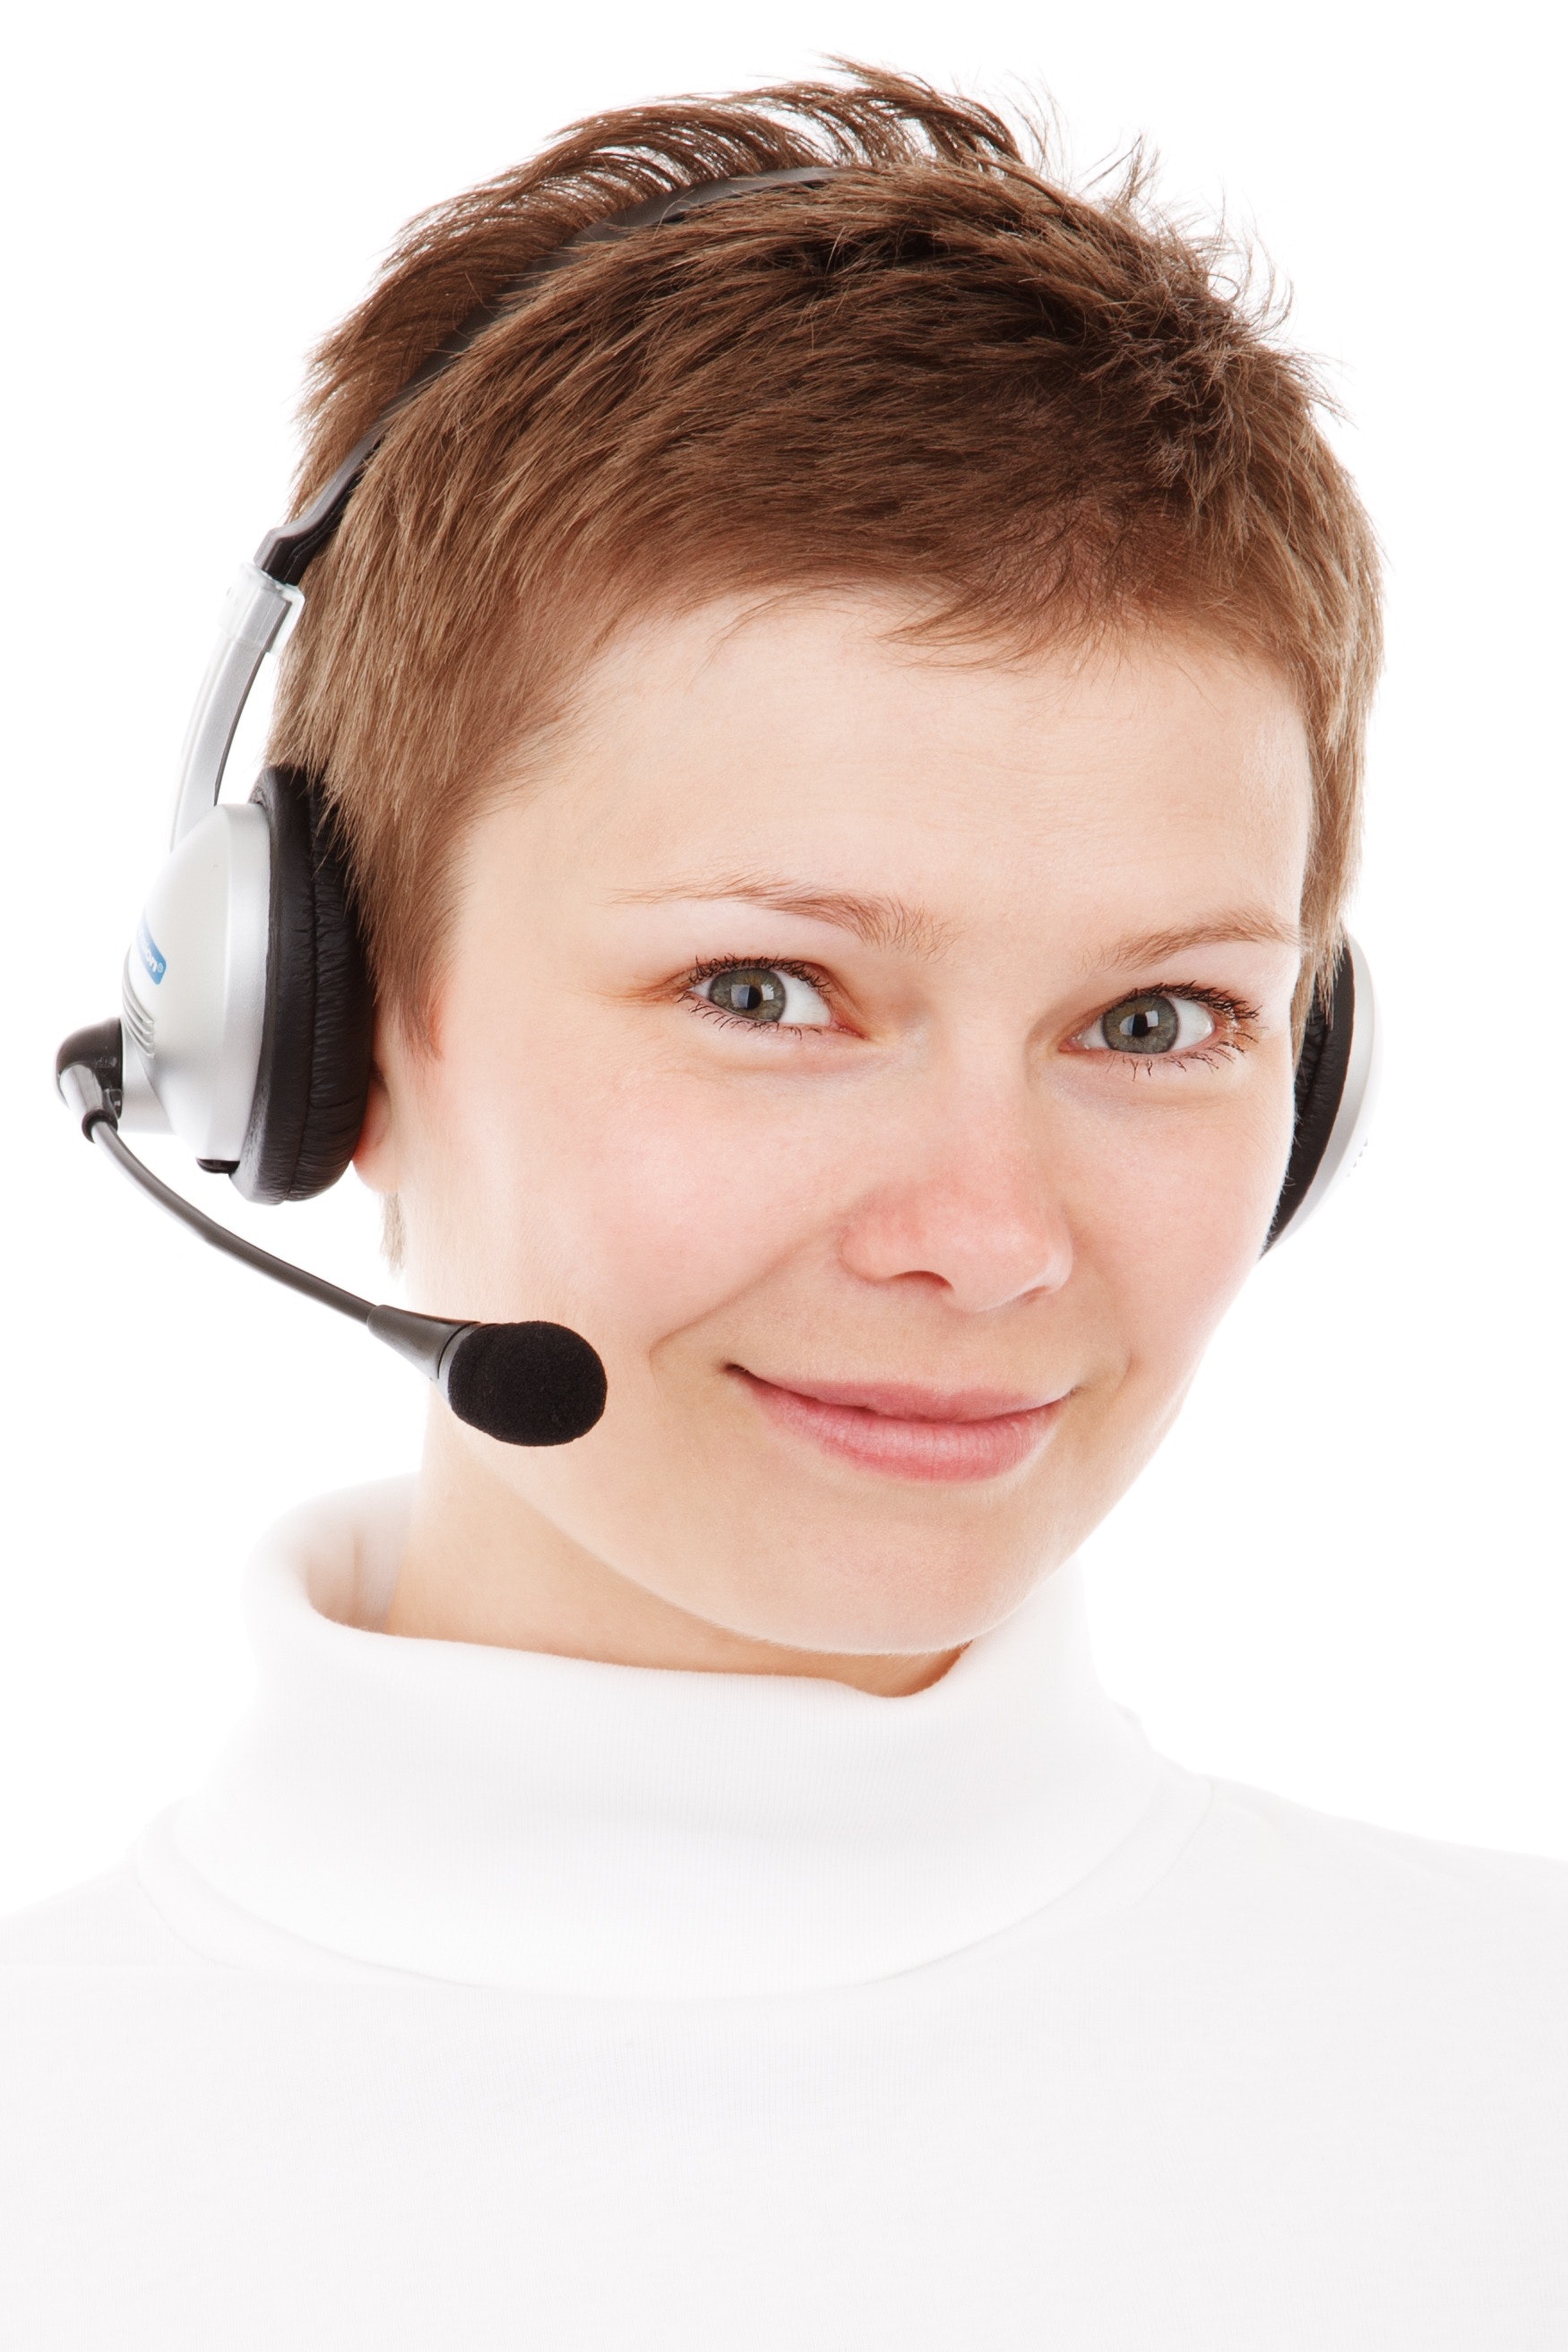 Person wearing silver headset smiling photo